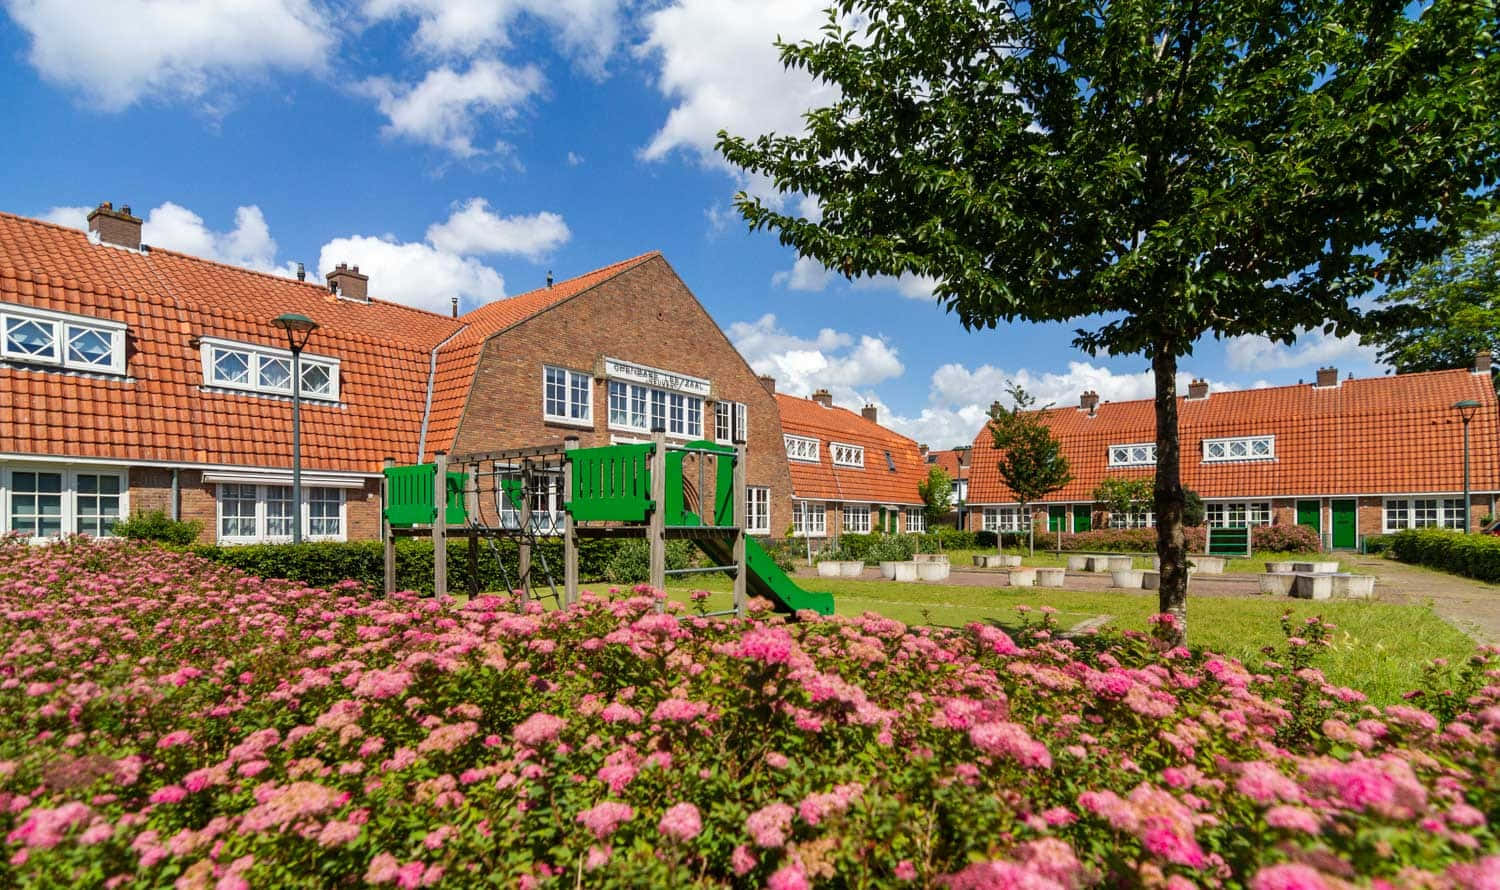 Hilversum Residential Area With Playground Wallpaper